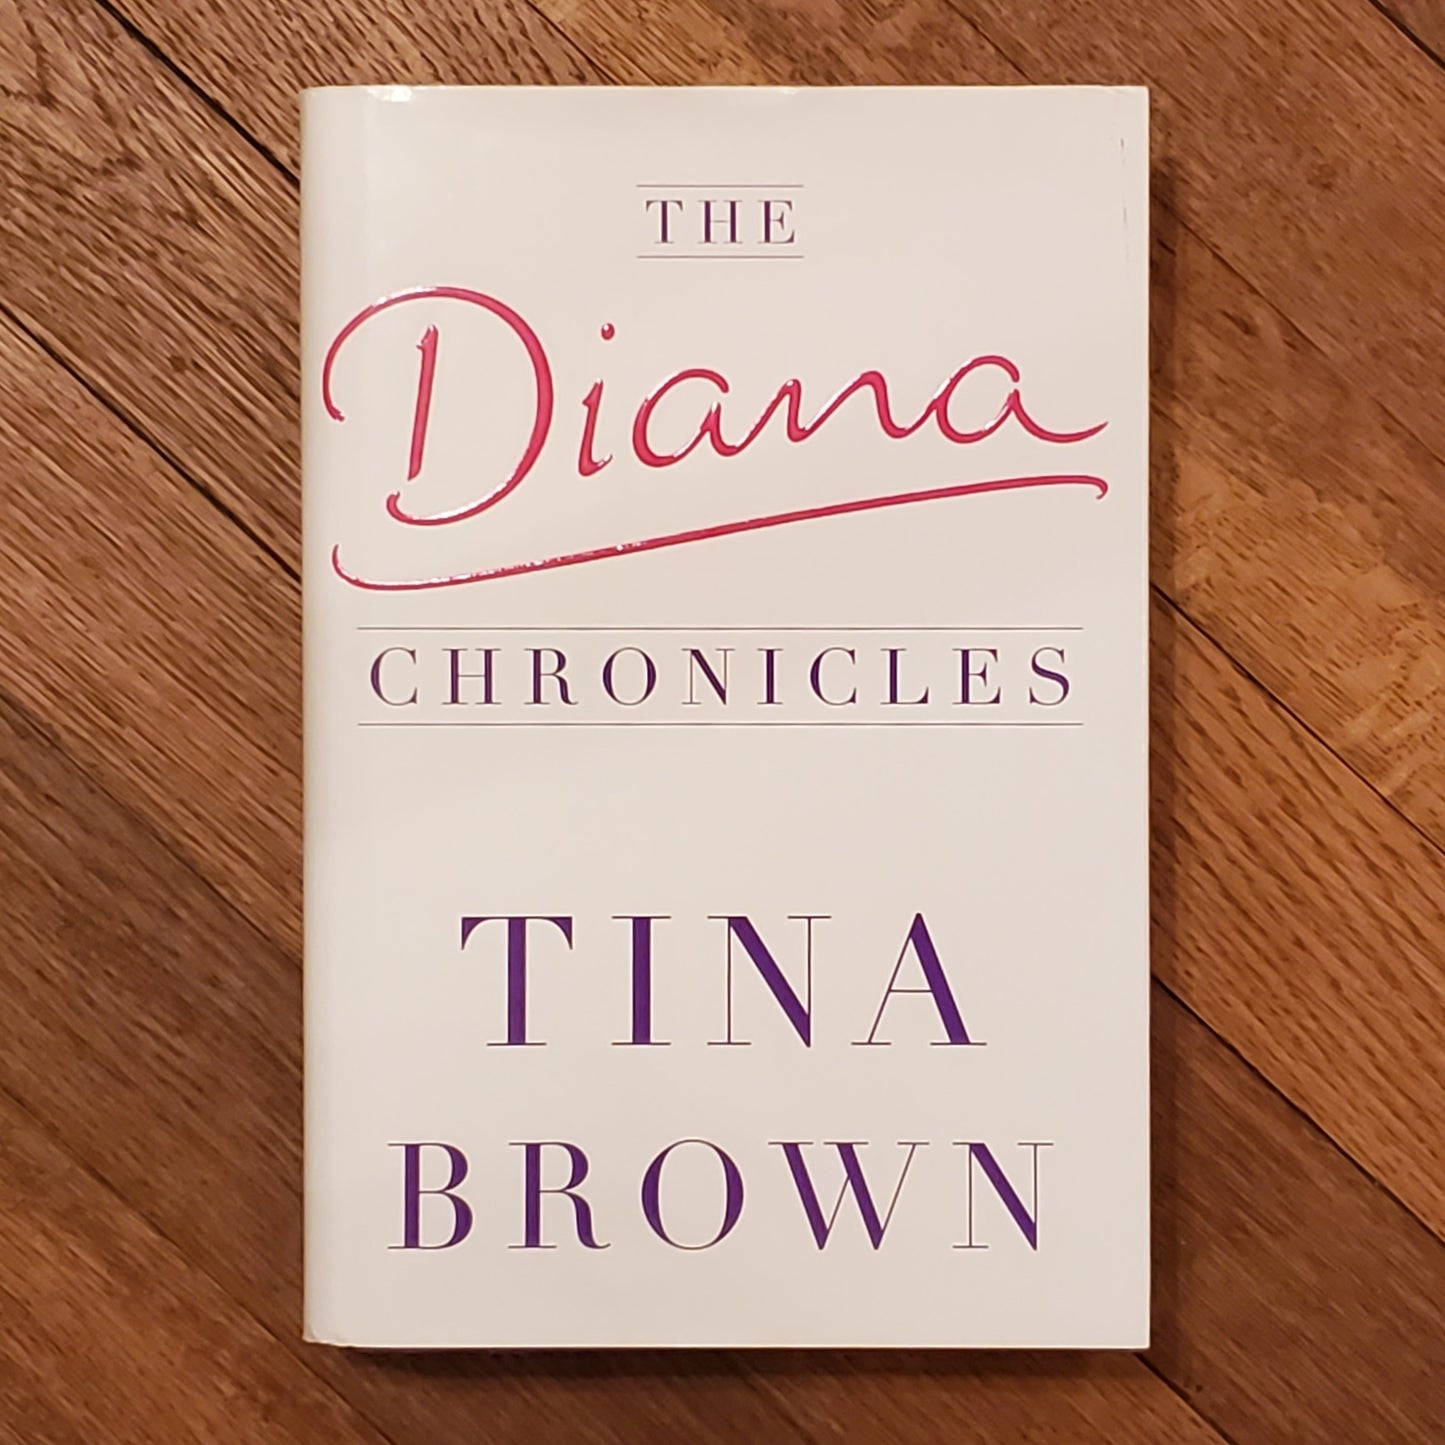 GB Used - The Diana Chronicles